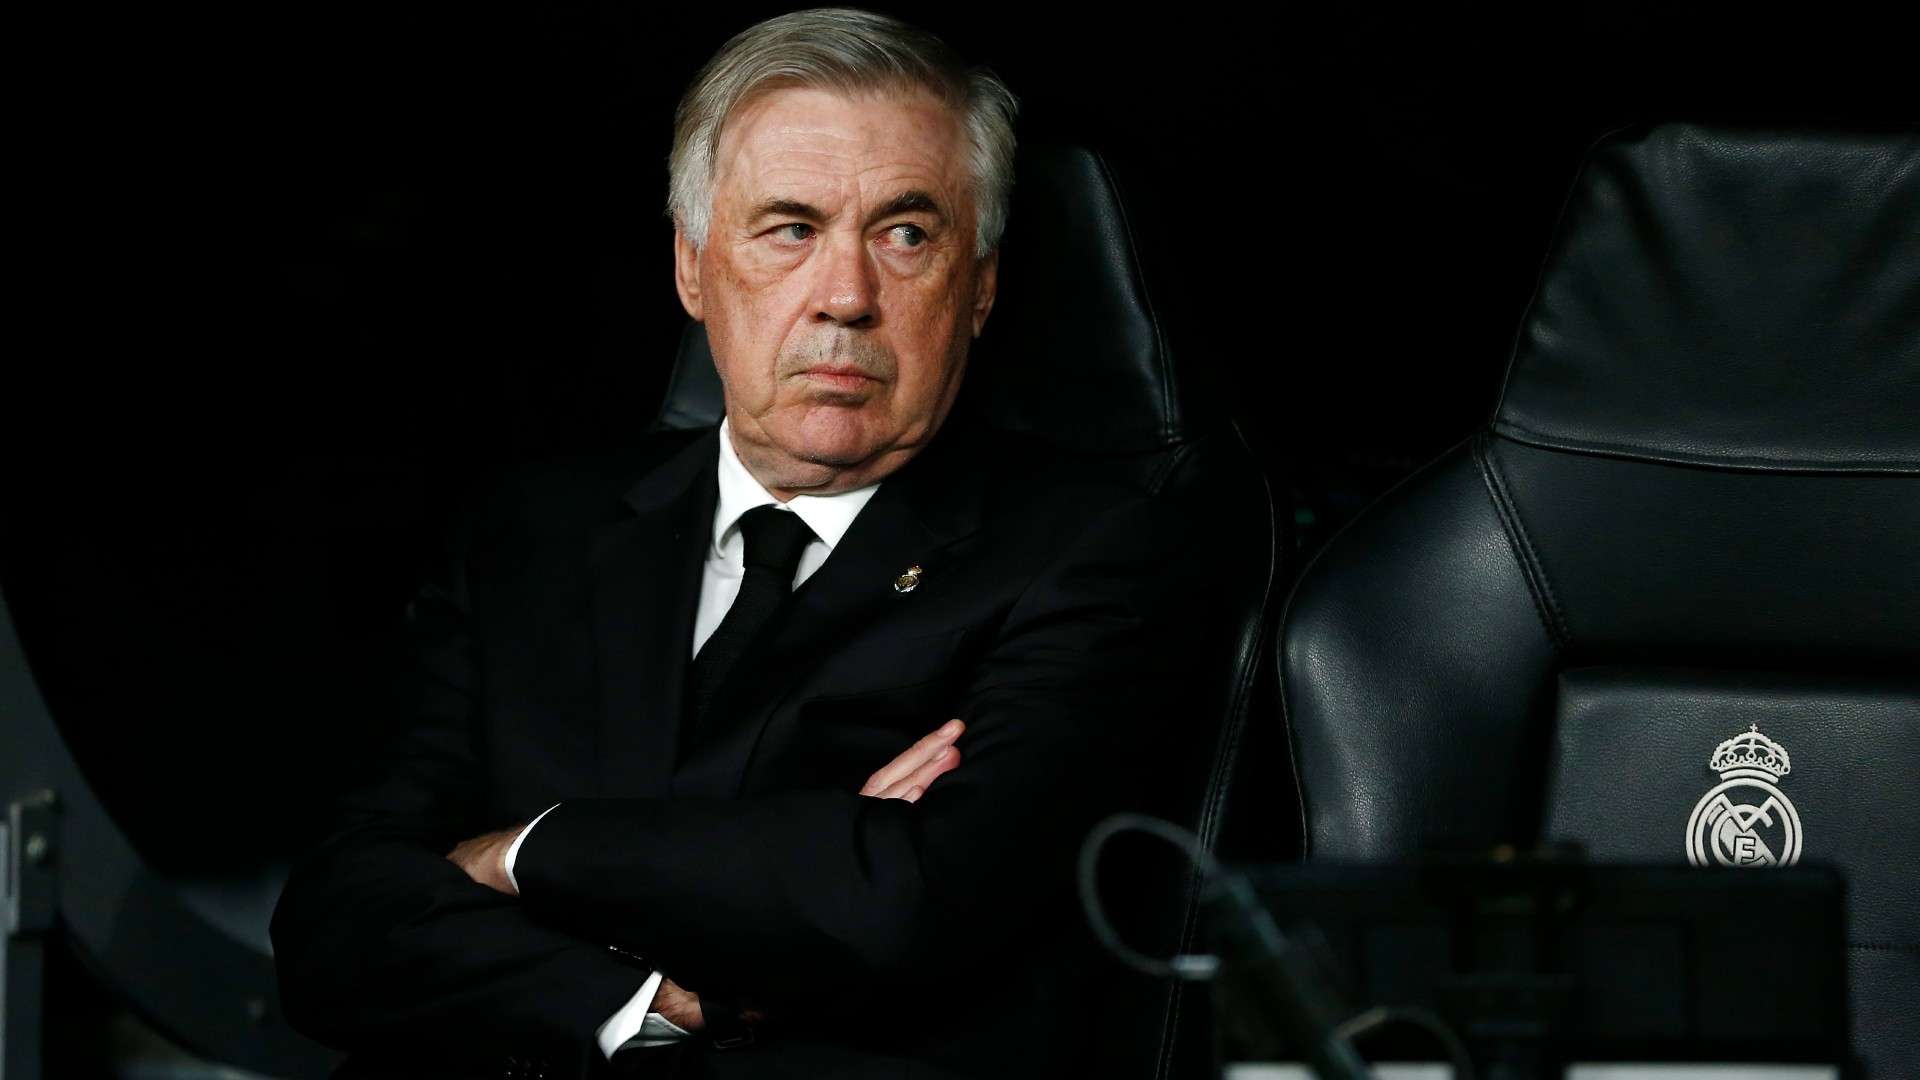 Carlo Ancelotti, Manager of Real Madrid